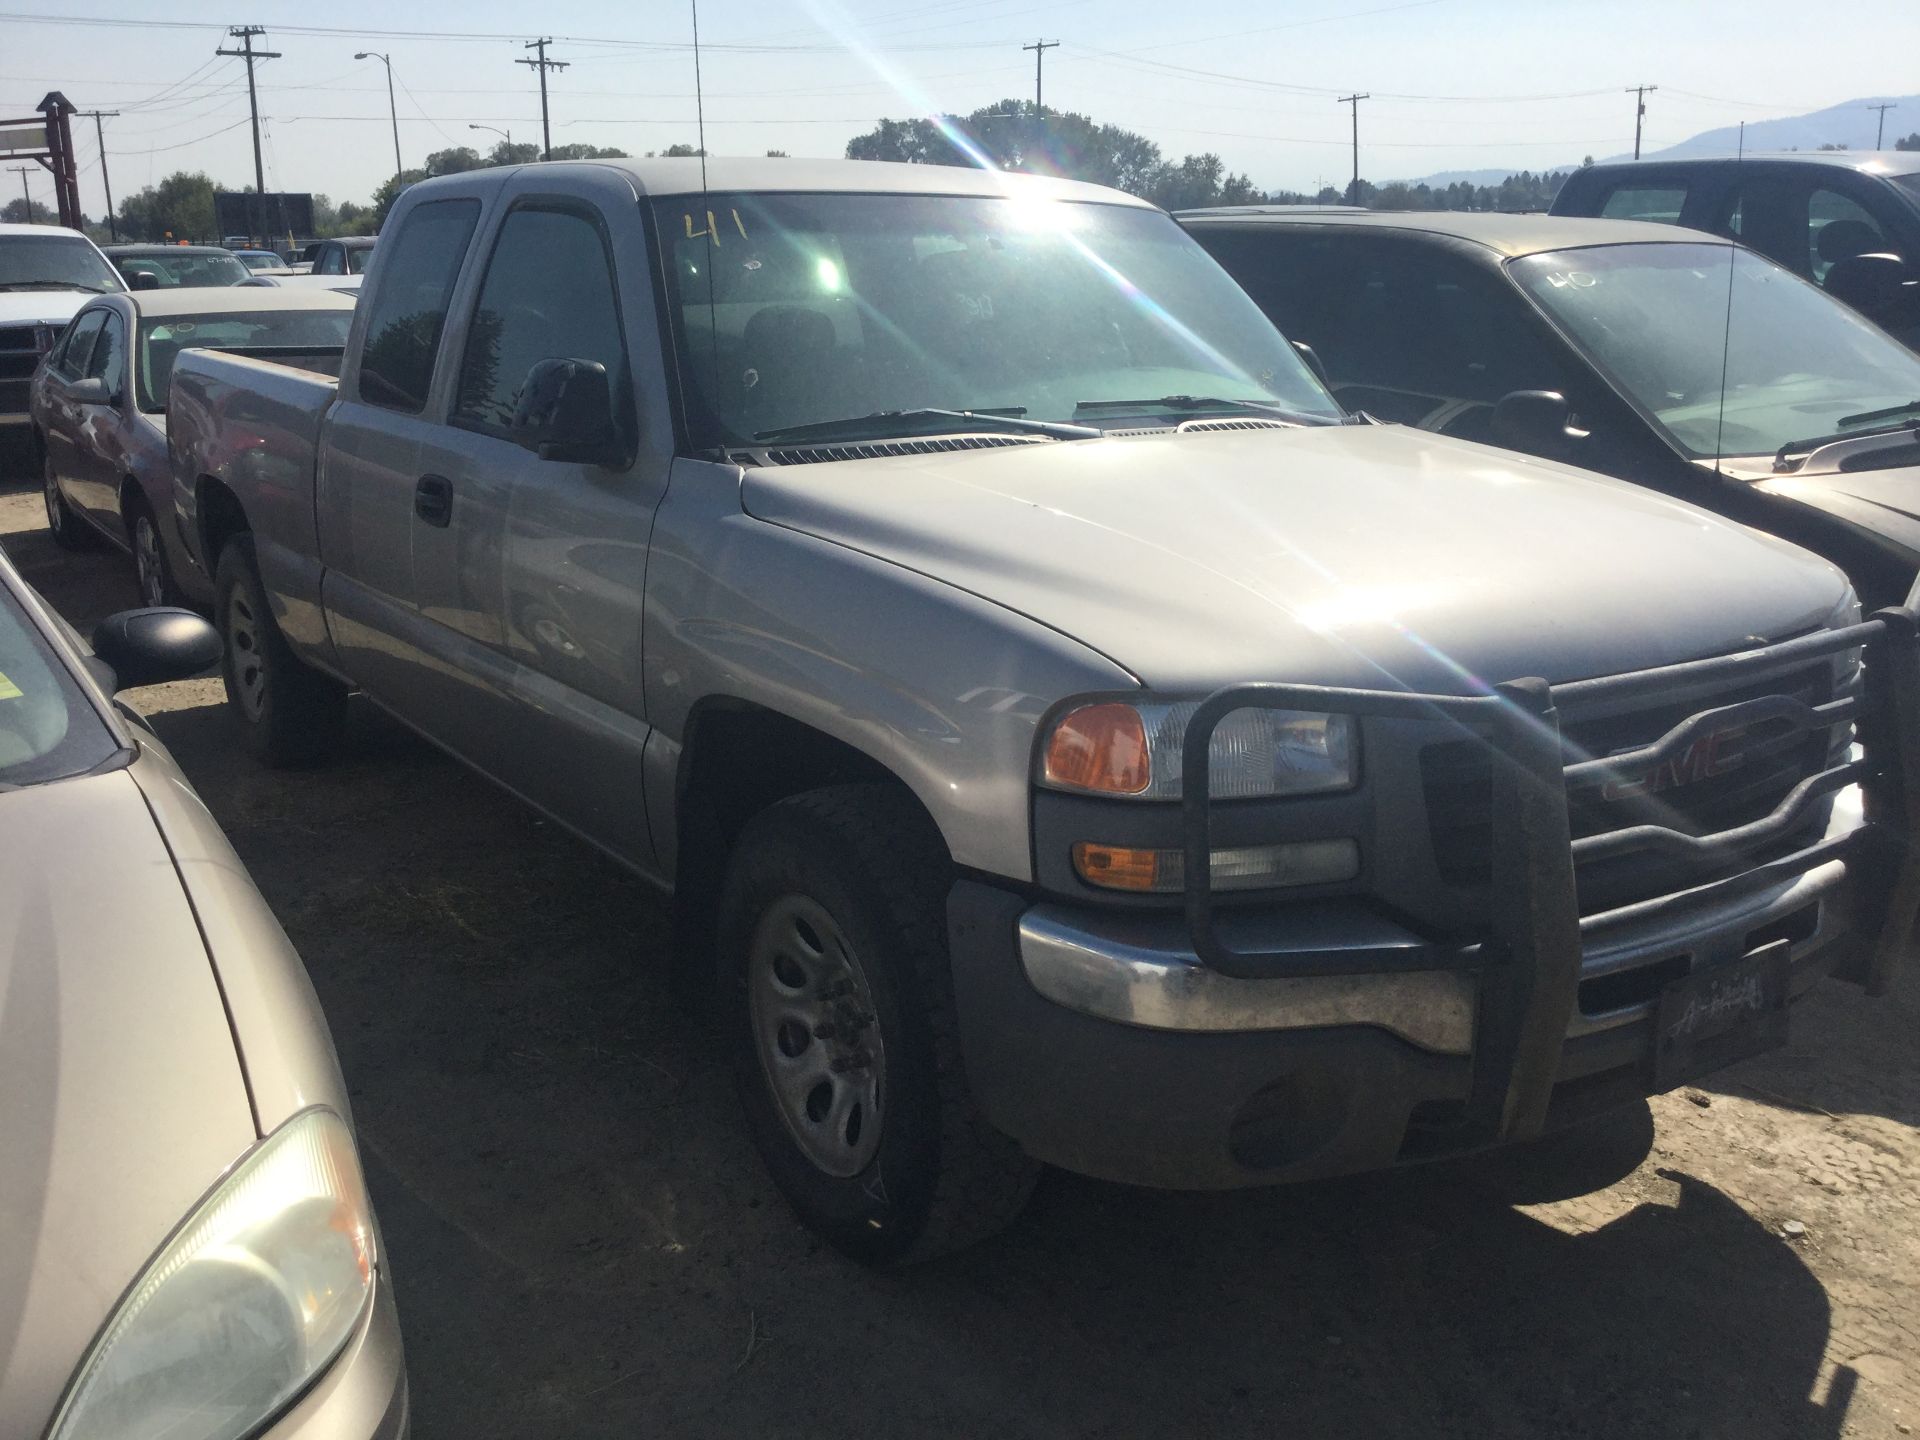 Year: 2005 Make: GMC Model: 1/2T Type: Pickup Vin#: 319596 Mileage/Hours: 194625 4.8L auto, 4x4, XC, - Image 3 of 4